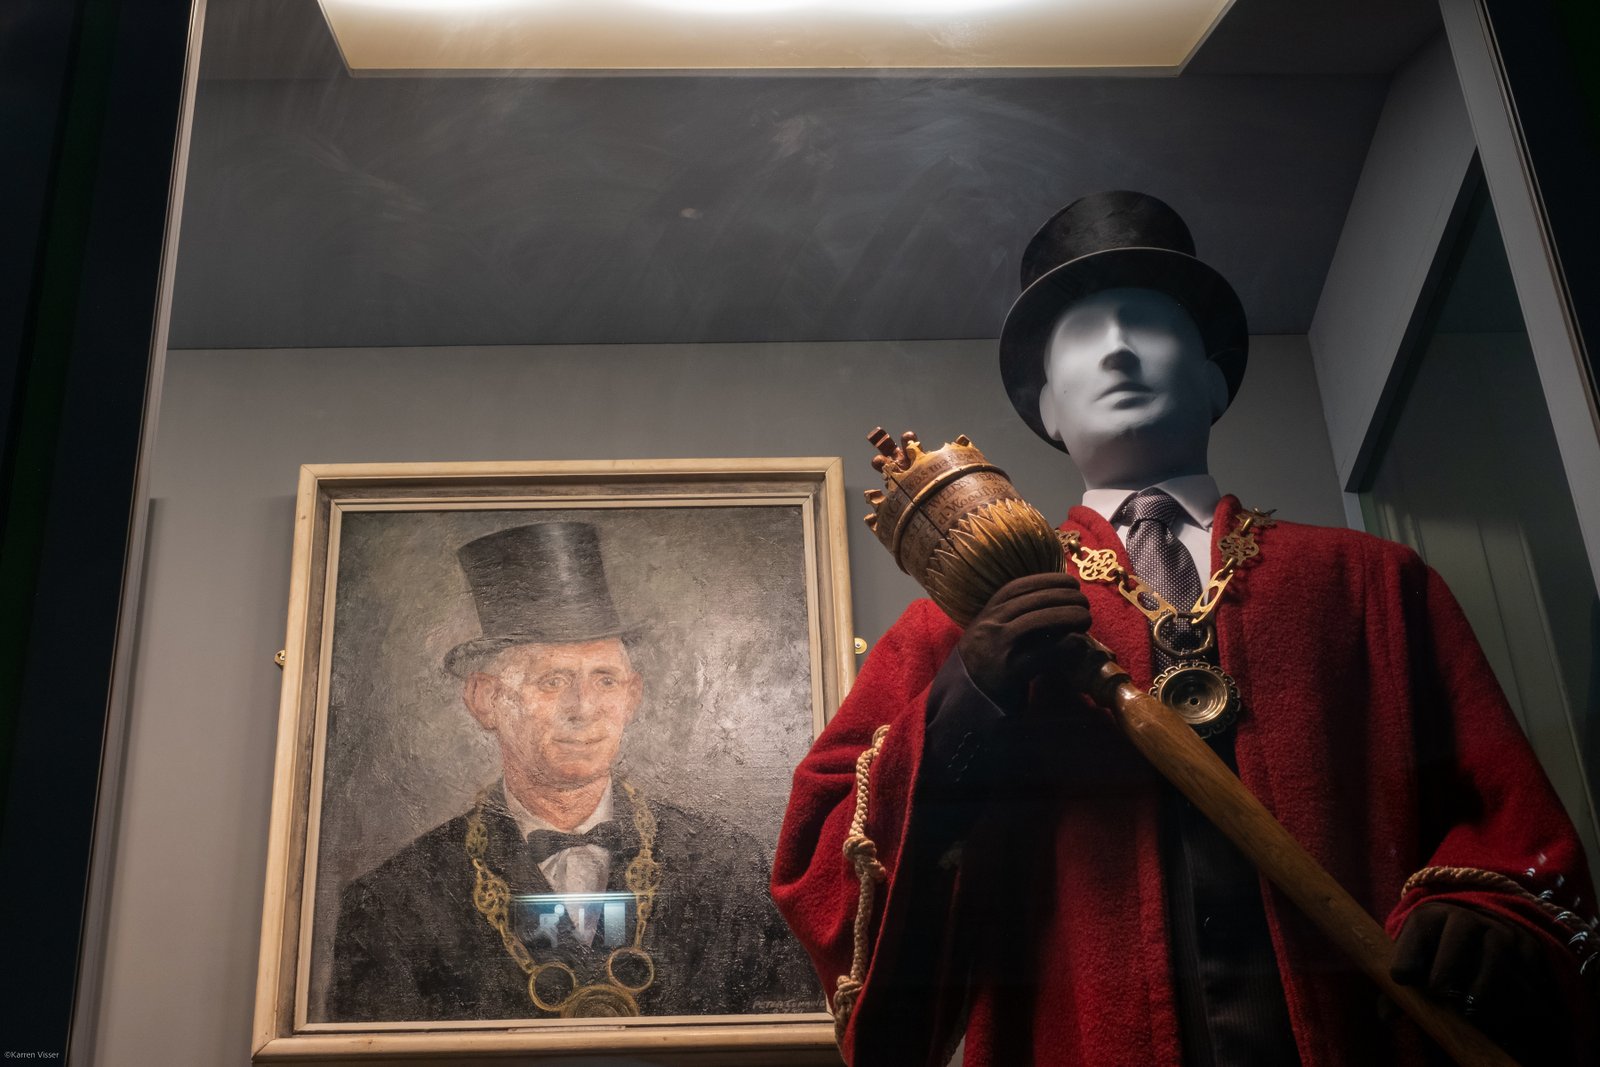 A display case with a mannequin in Mayor’s robes, a top hat and carrying a carved mace seen from the waist up with a portrait of a Mayor in a similar dress.